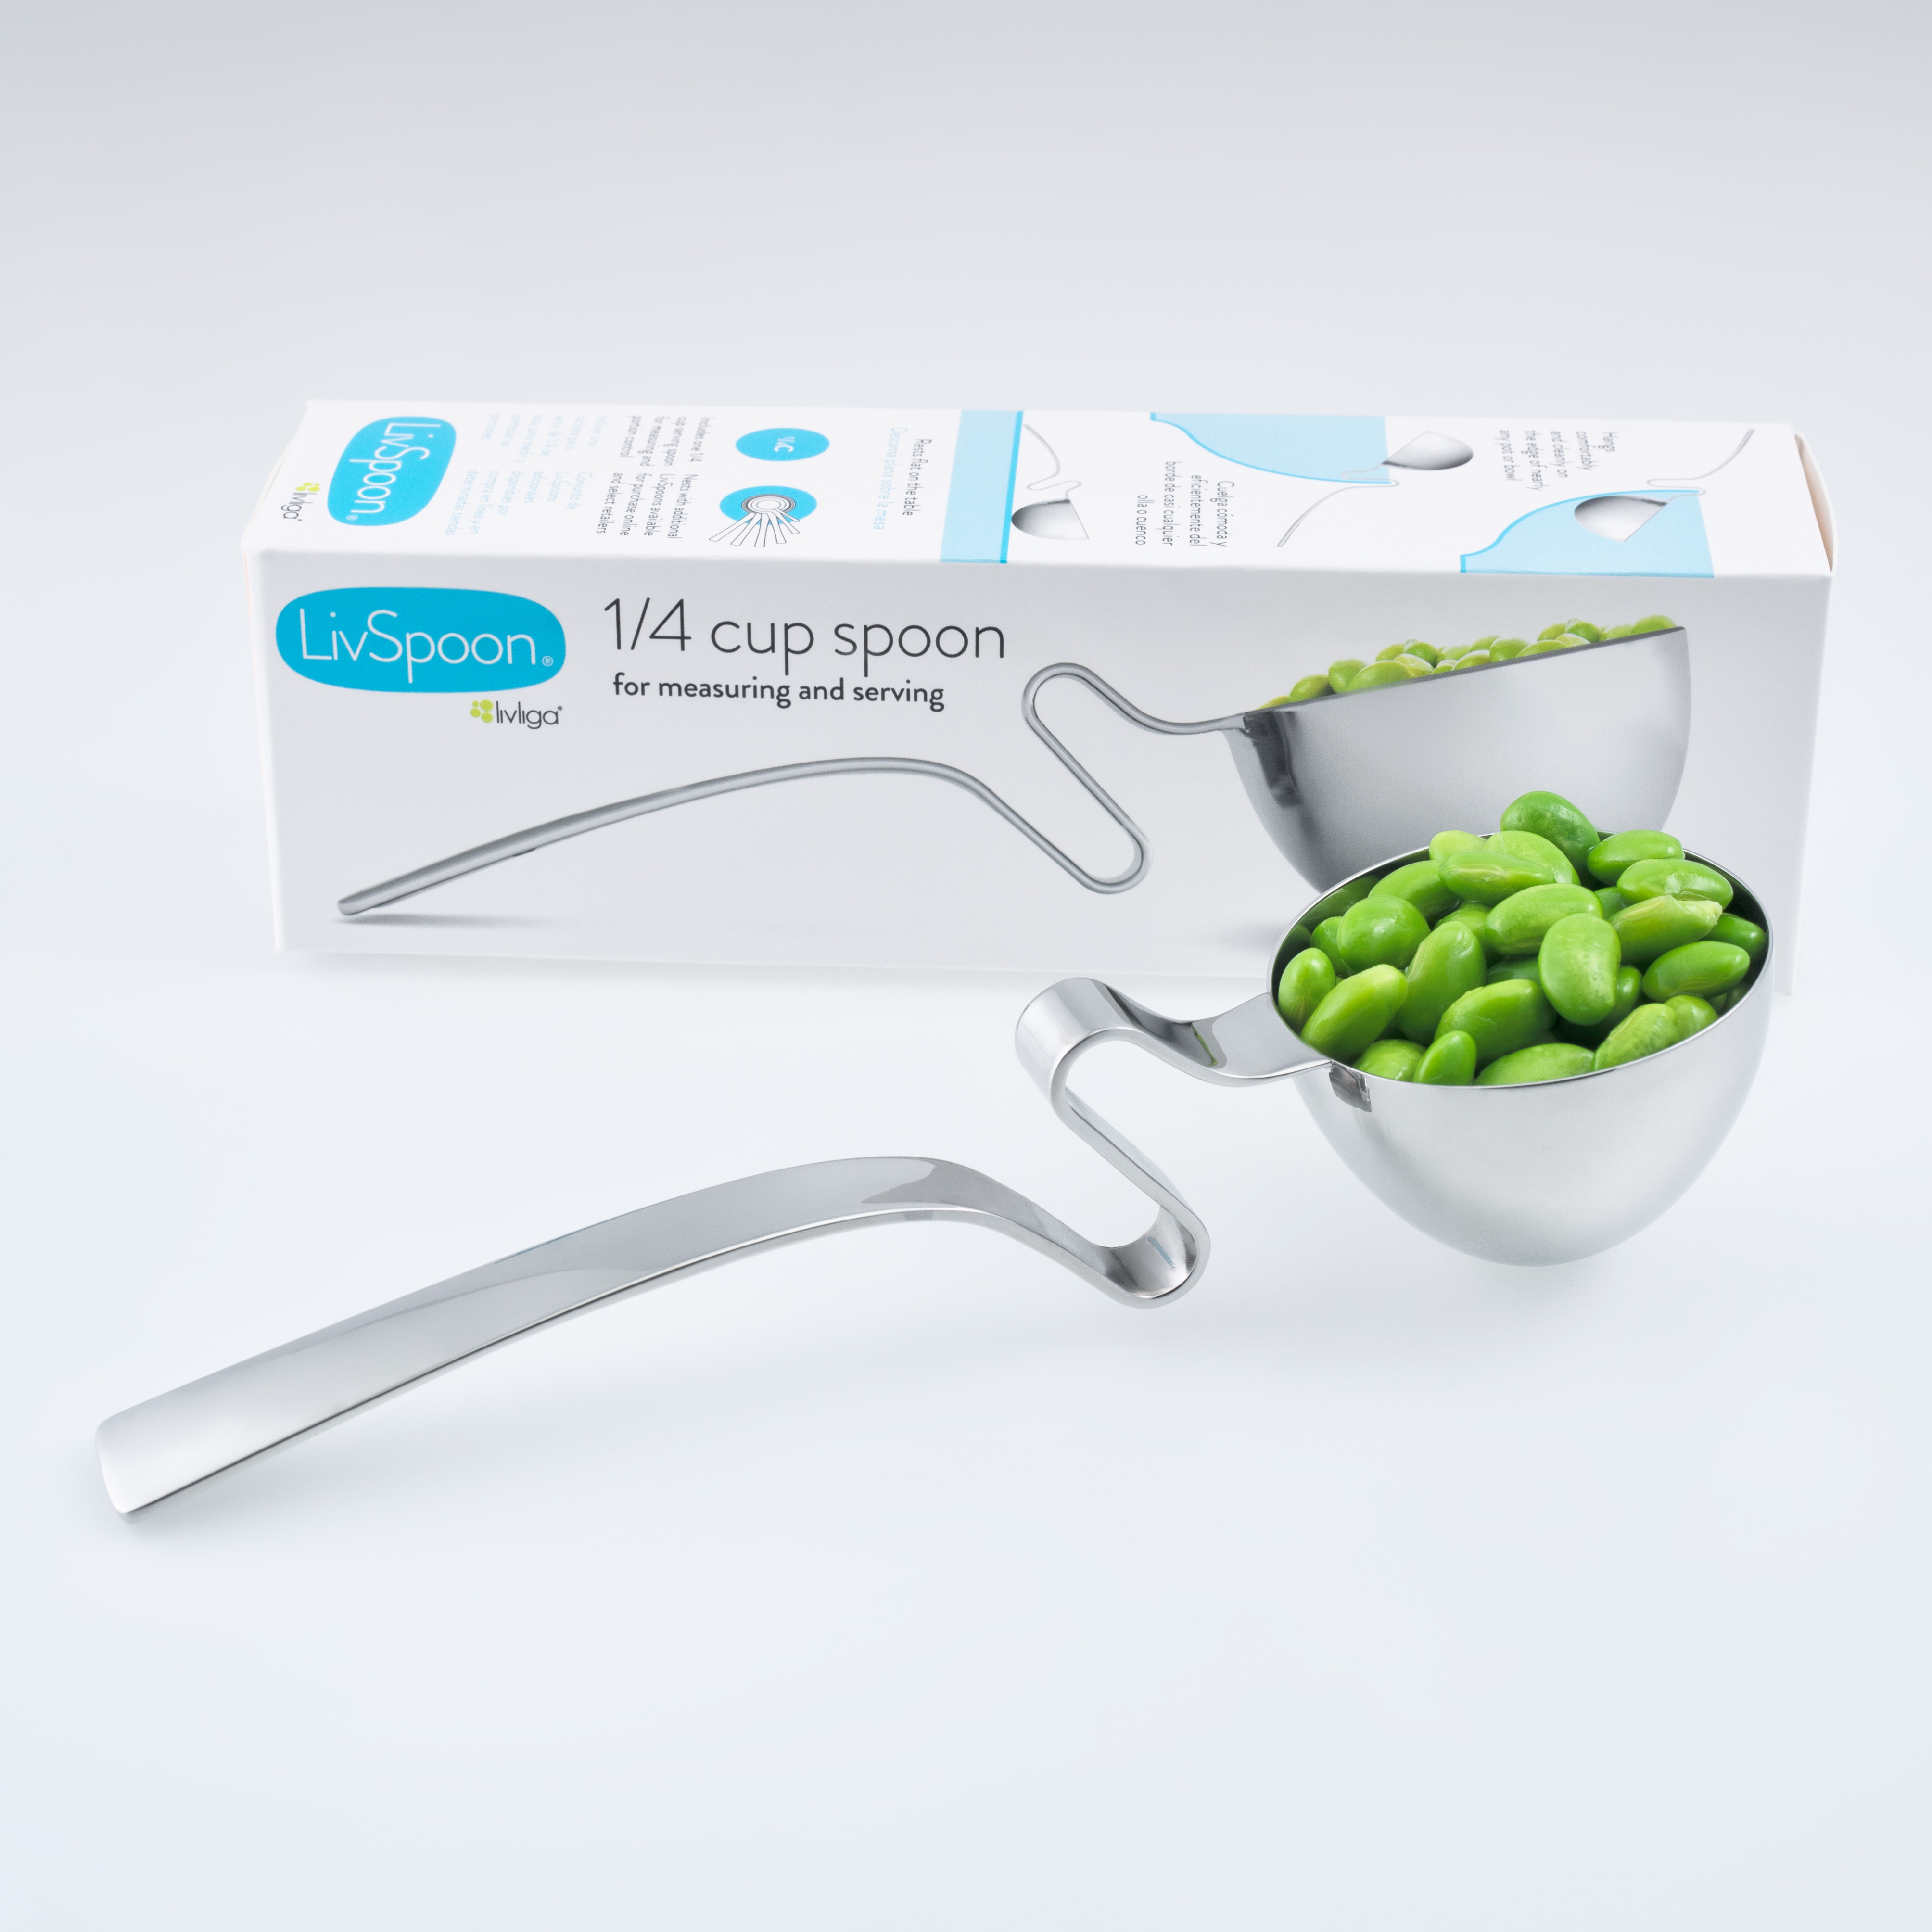 The new 1/4 cup LivSpoon is great for prepping, cooking and serving right-sized meals